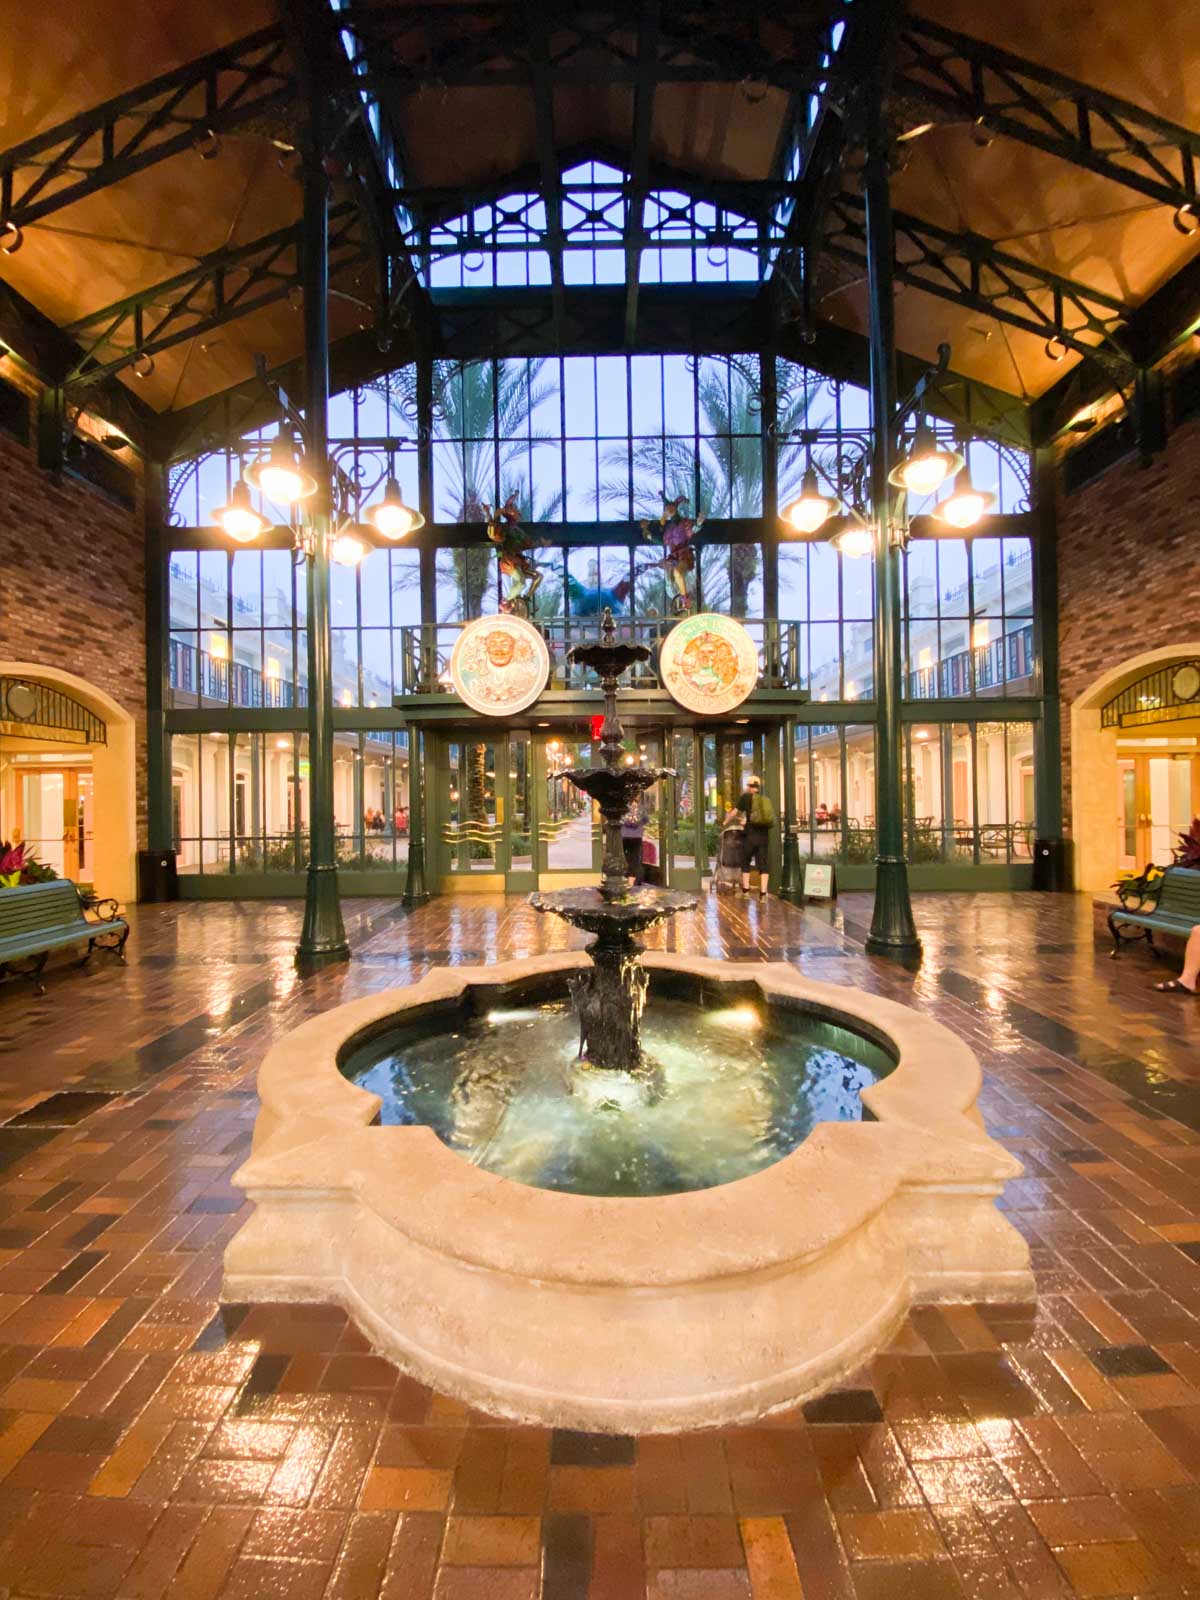 The lobby of the French Quarter resort.